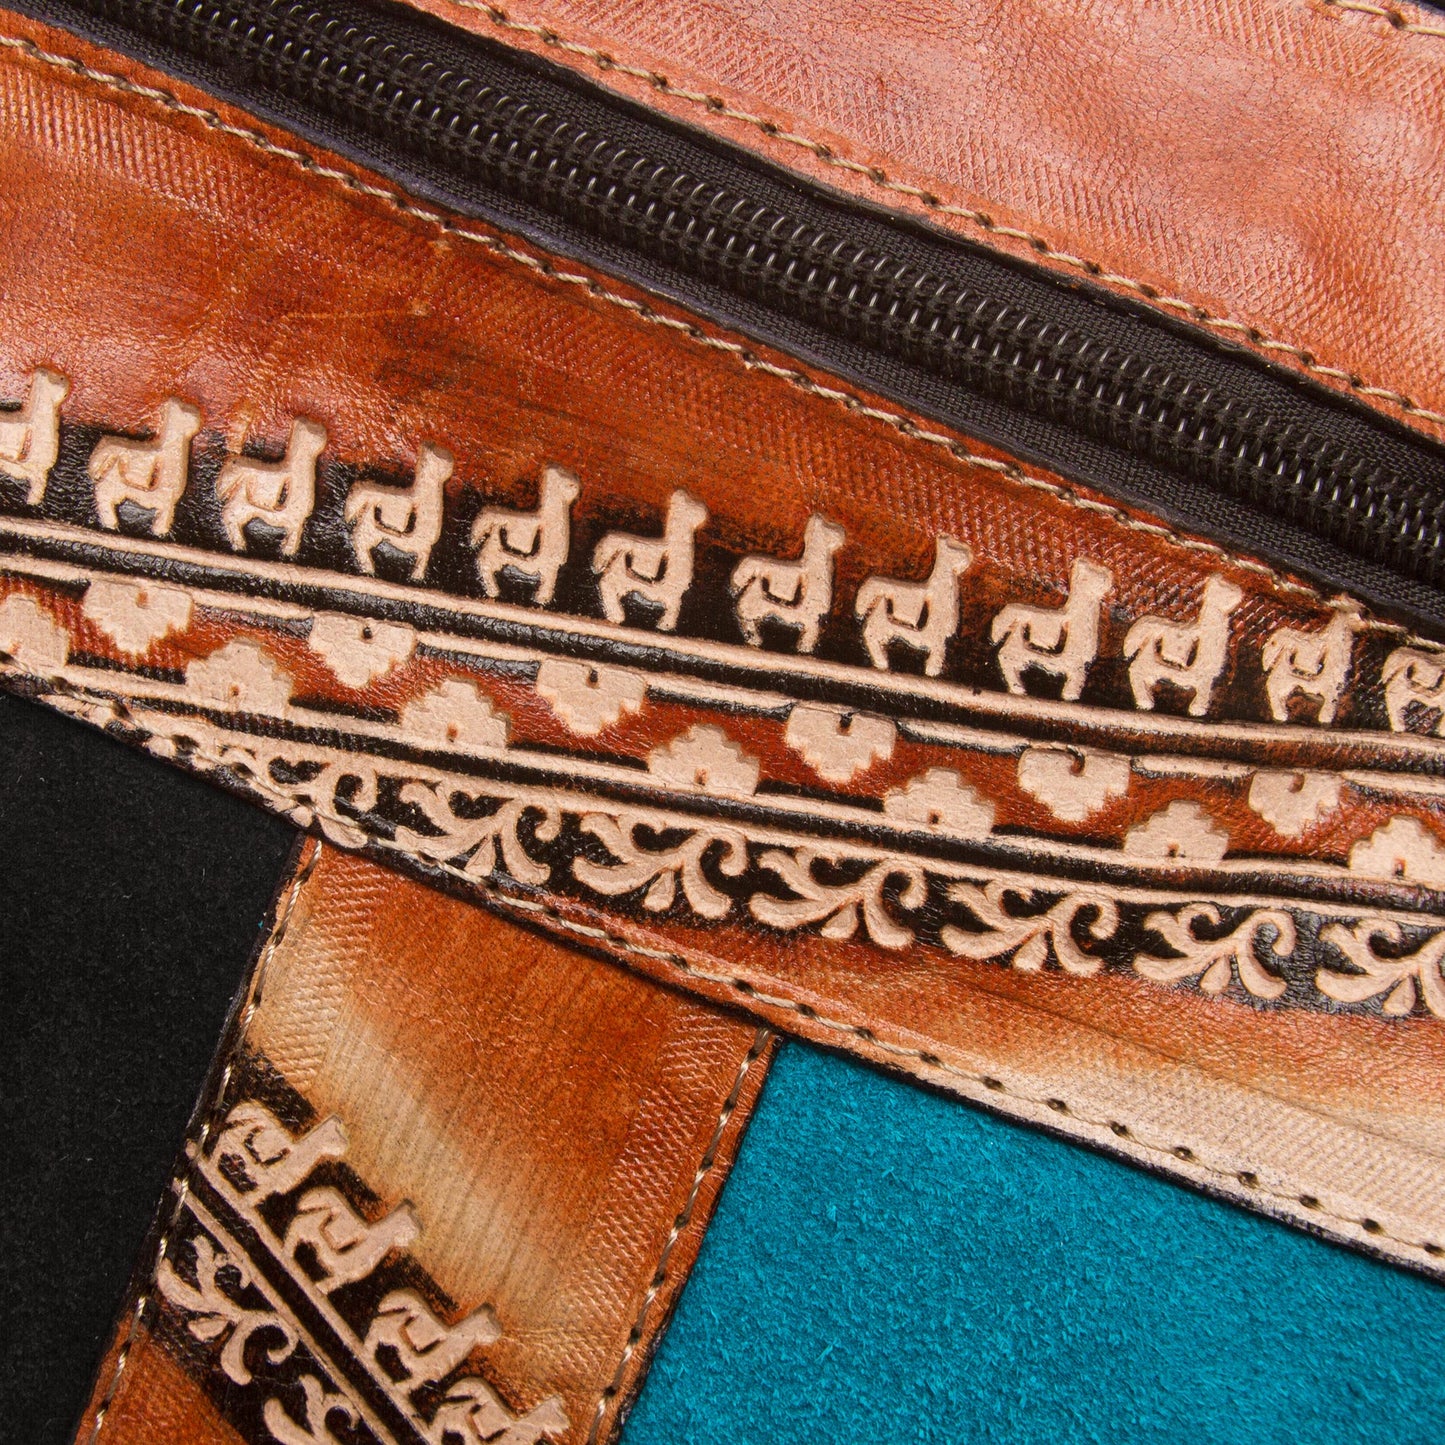 The Llama Way Brown and Teal Llama Pattern Leather Accented Suede Sling